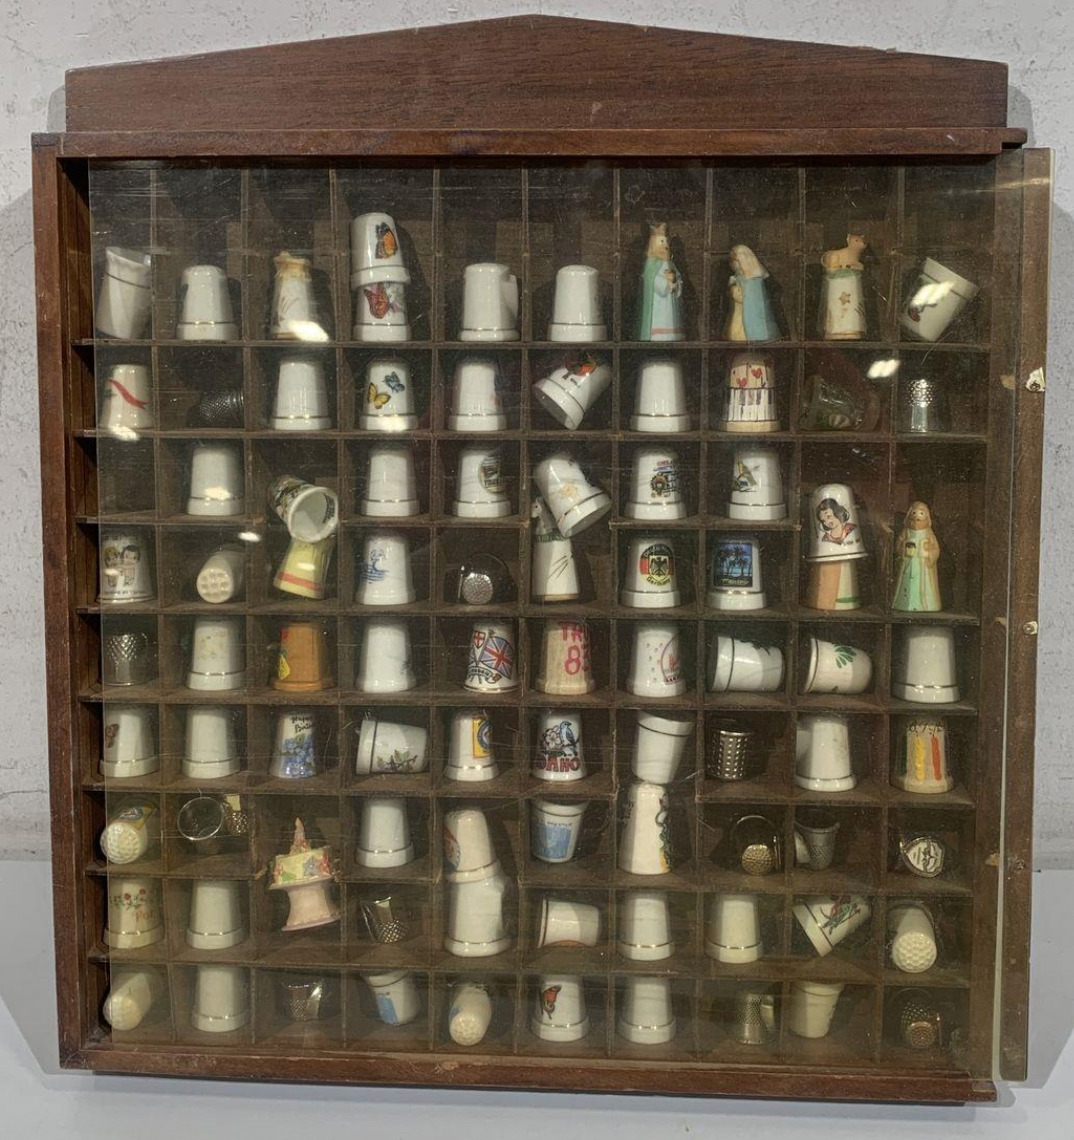 Wooden Thimble Display Case with 56 Thimbles Incl. Butterfly, Nativity, Disney